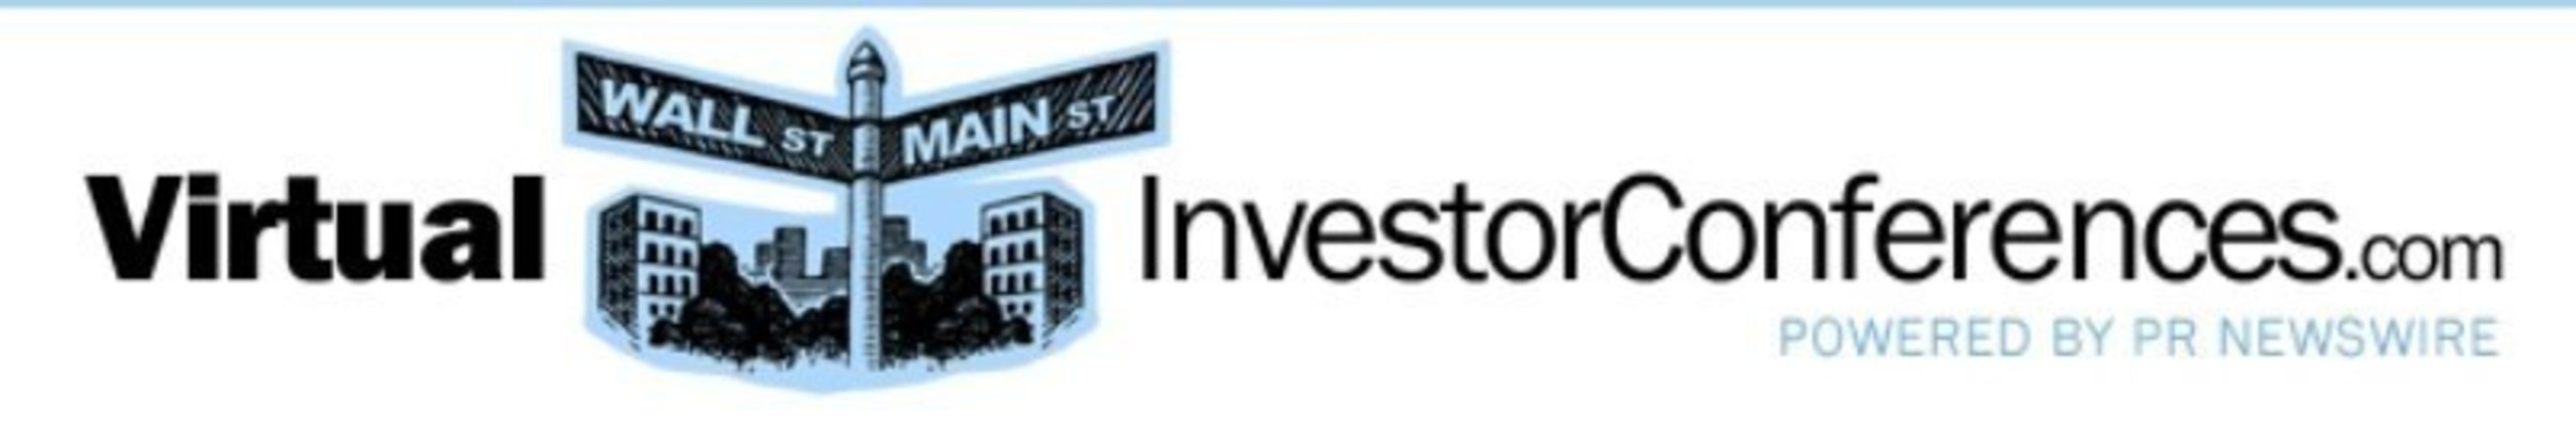 View investor presentations 24/7 at  www.virtualinvestorconferences.com .